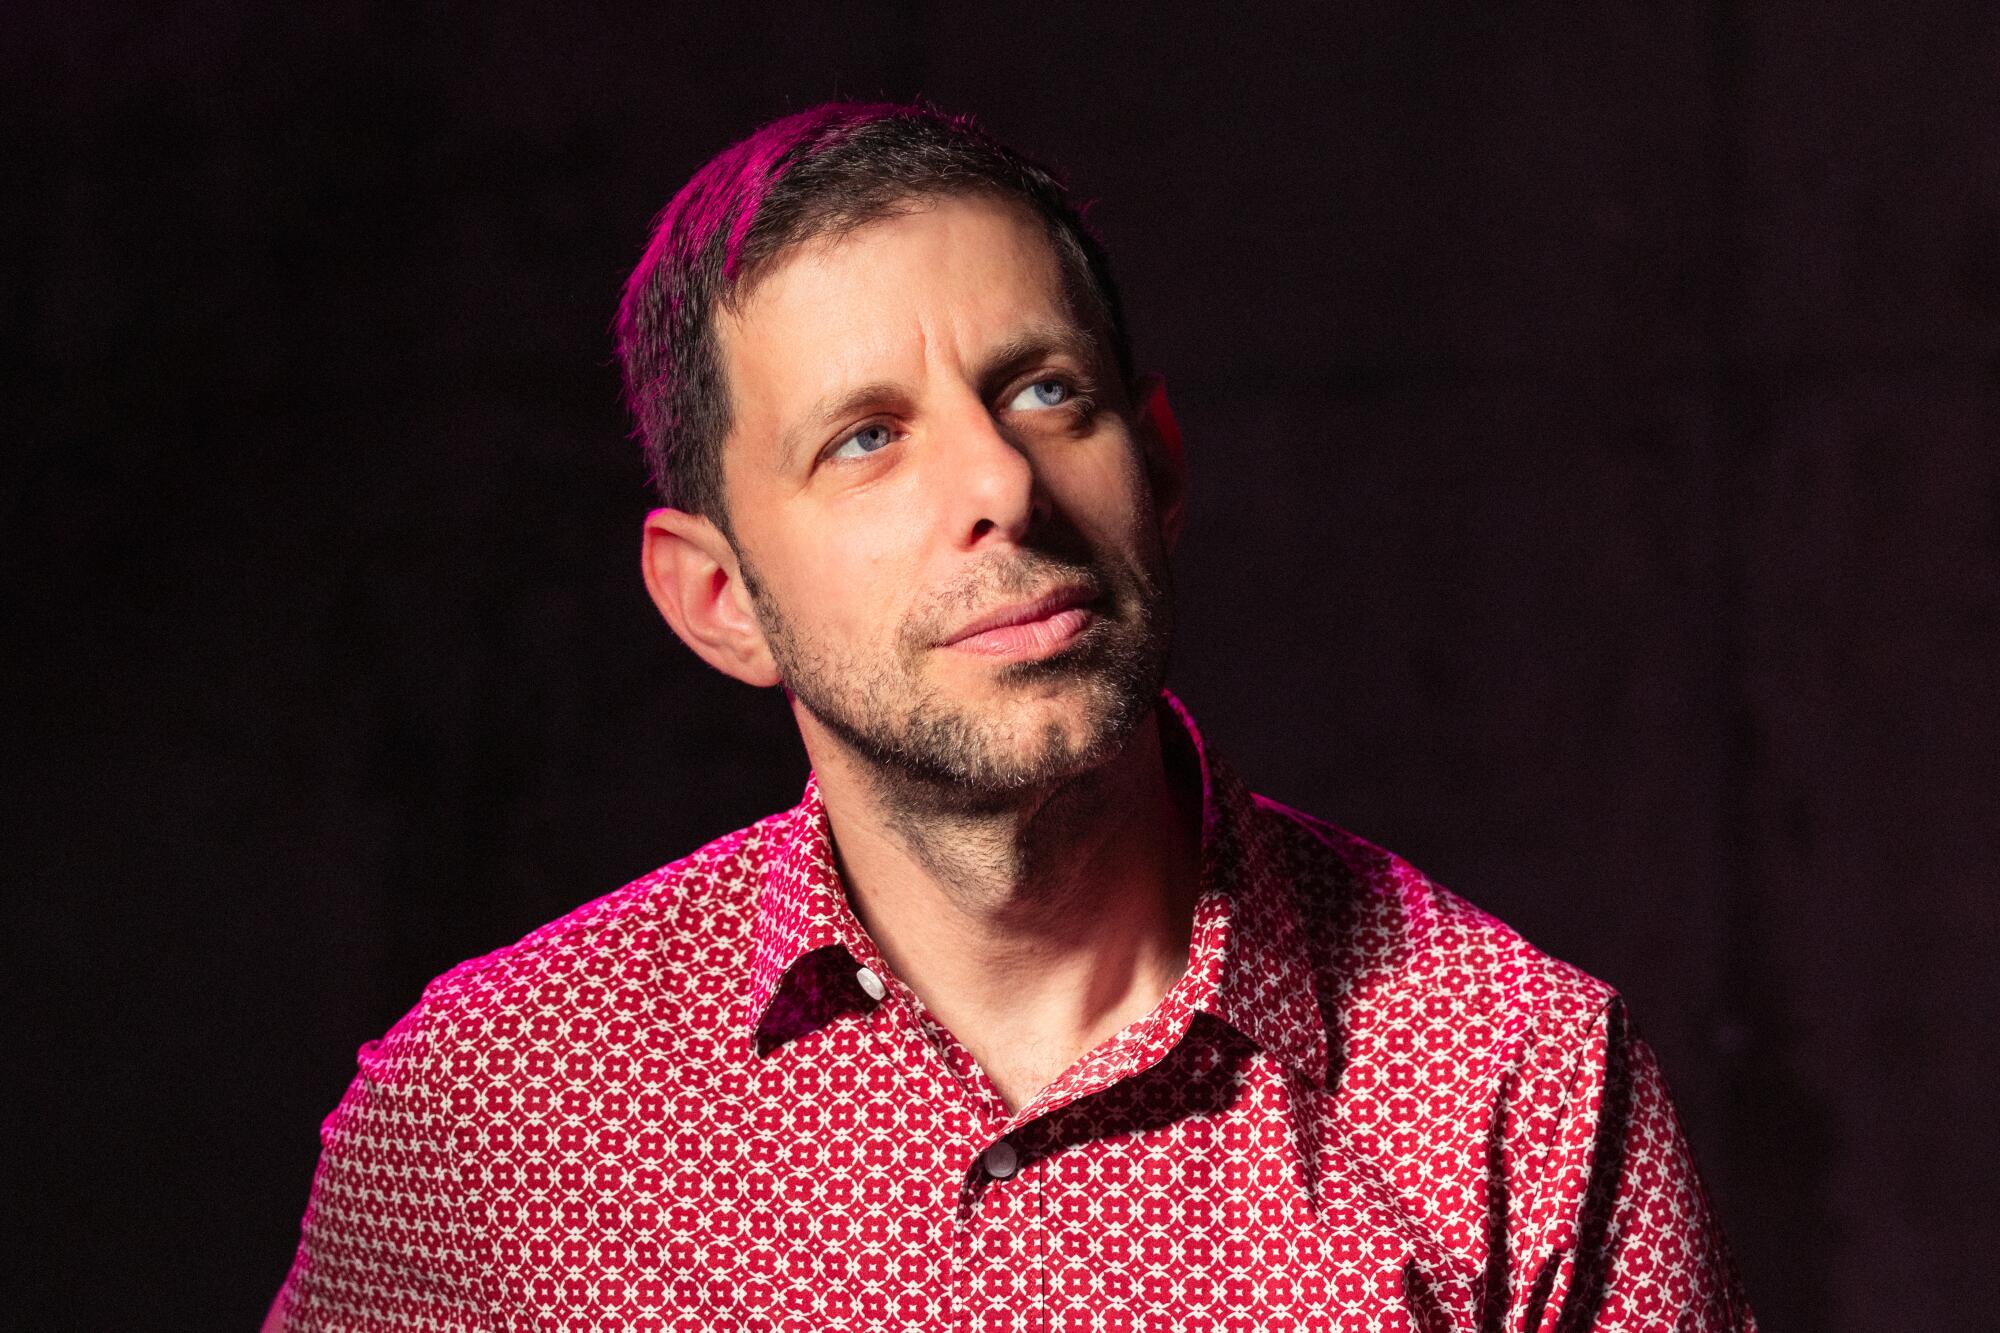 Yuval Sharon, in a red patterned shirt, sits in front of a black background and looks to the side.